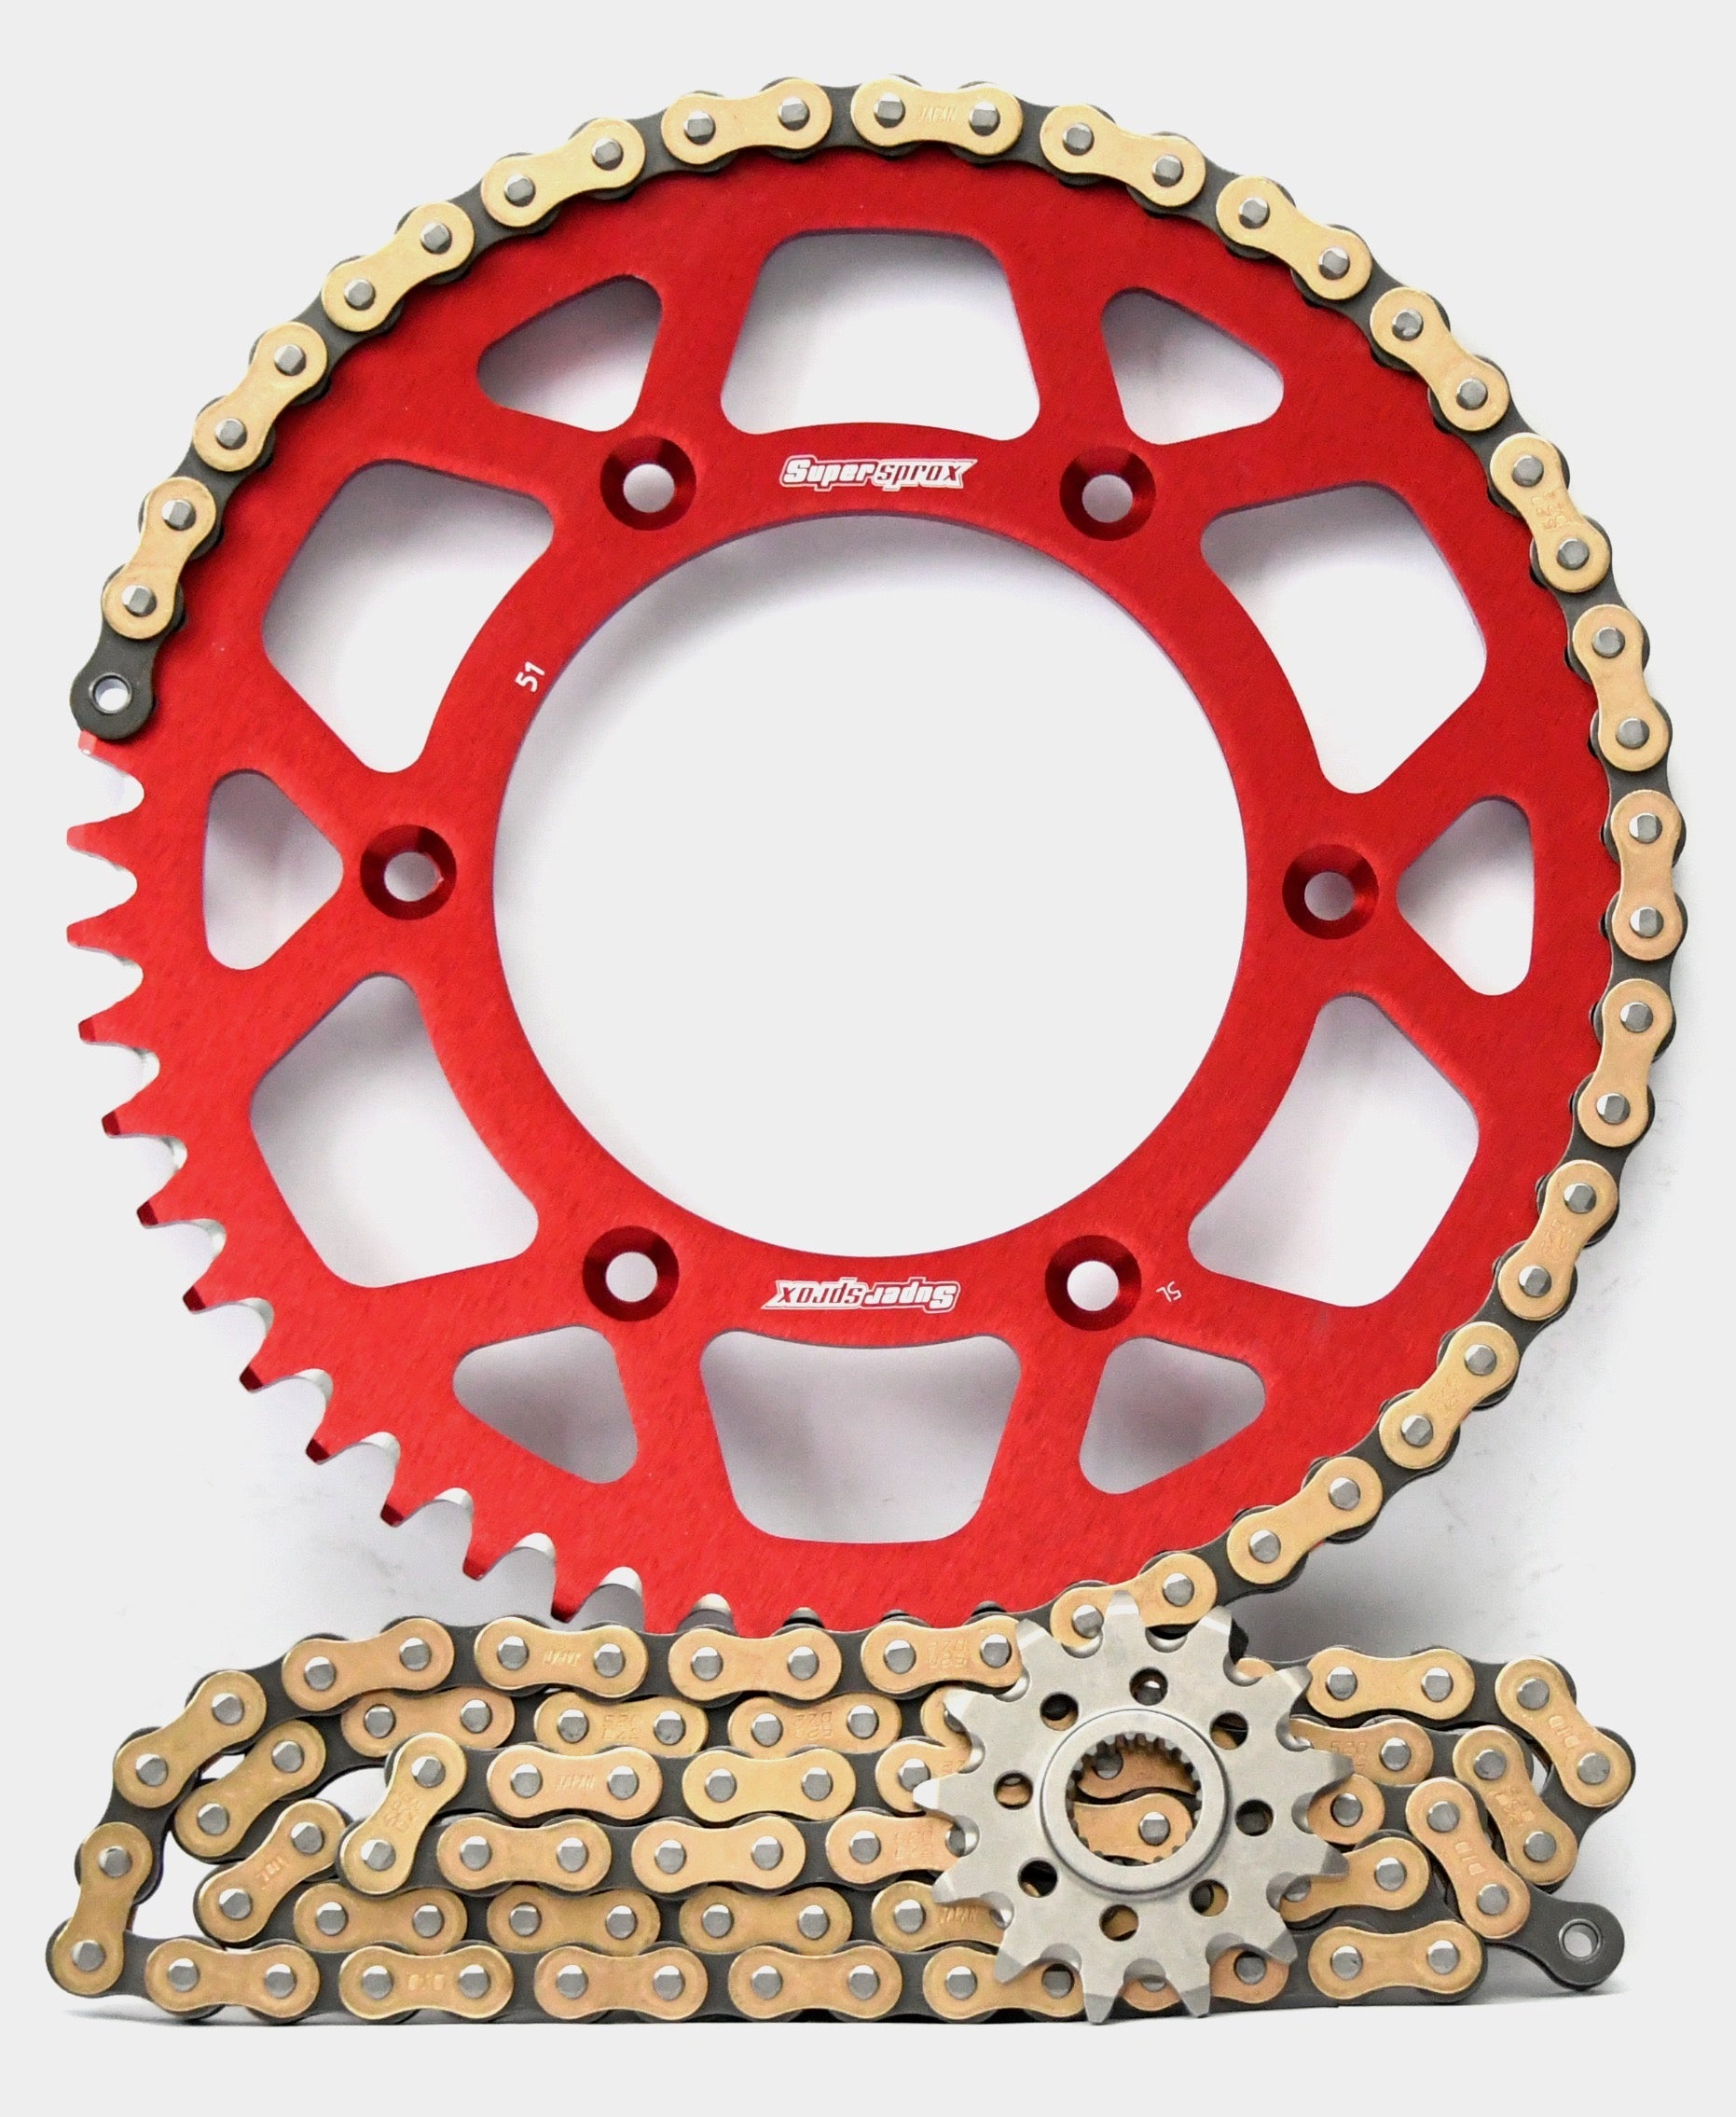 Supersprox Chain & Aluminium Sprocket Kit for Suzuki DR-Z 400E - Choose Your Gearing - 0